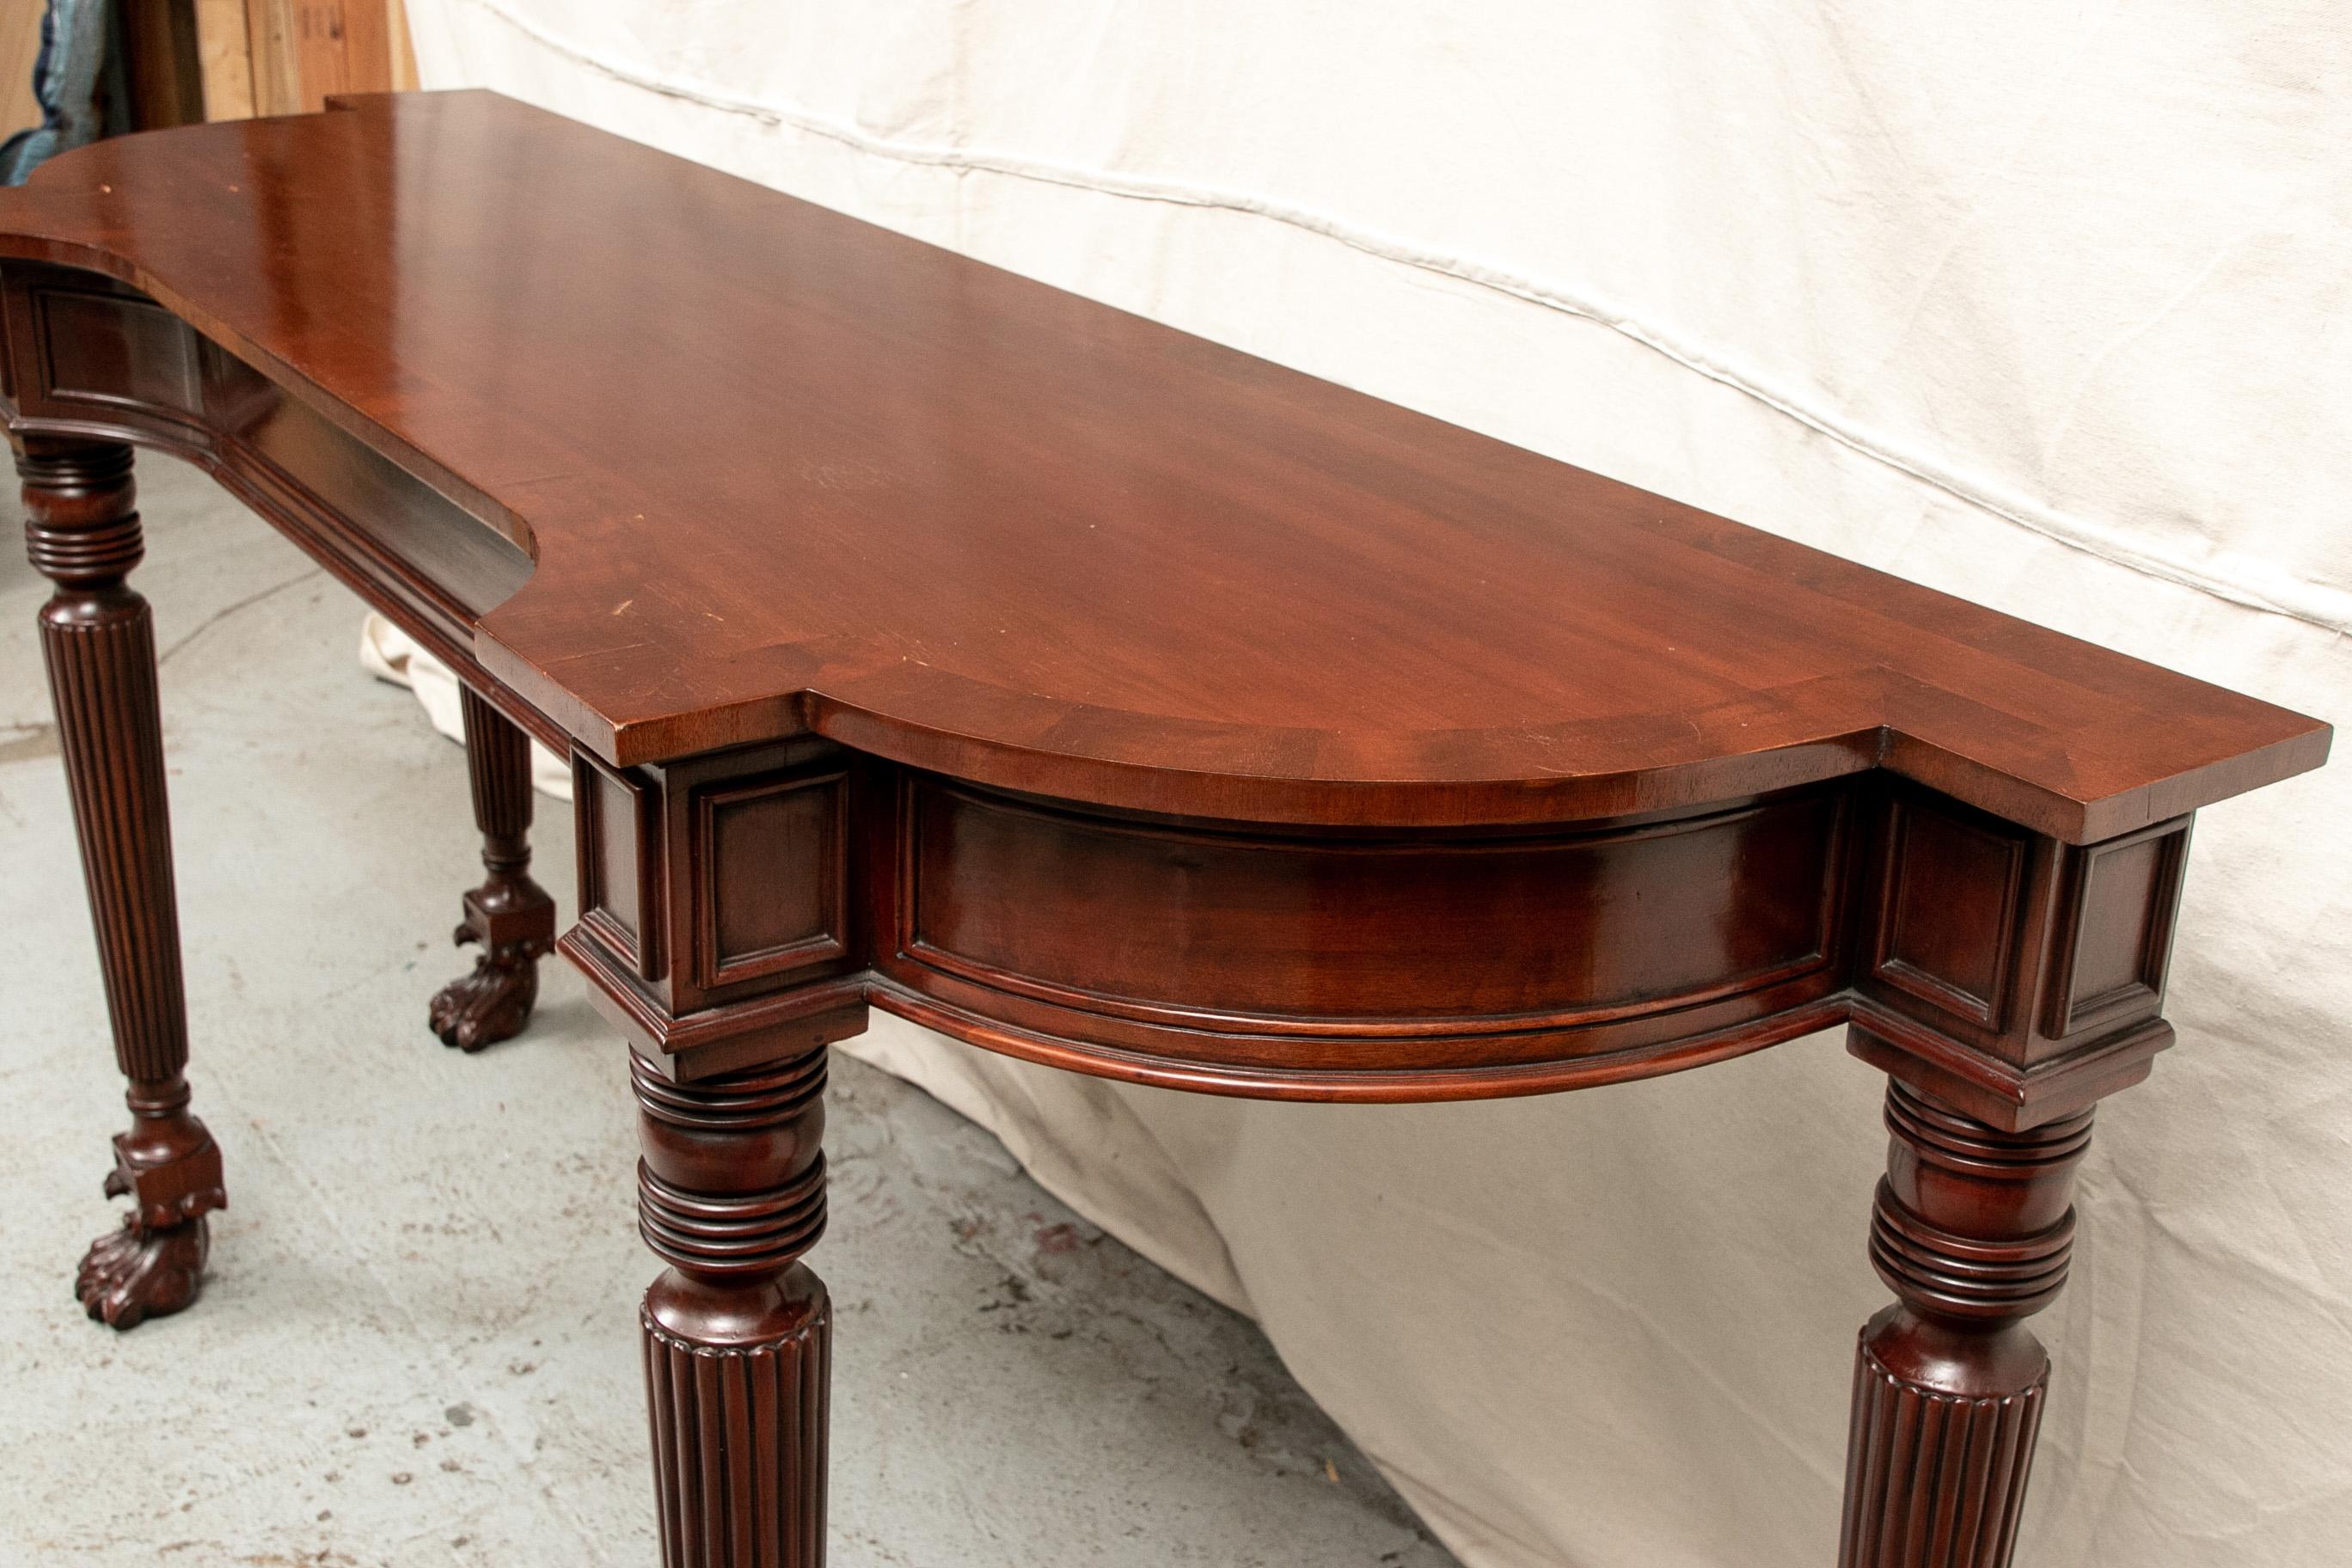 Early 20th century console table, circa 1940, mahogany, shaped demilune top over single central drawer and supported on turned and reeded cylindrical legs ending in intricately carved paw feet.

Condition: expected signs of use including some